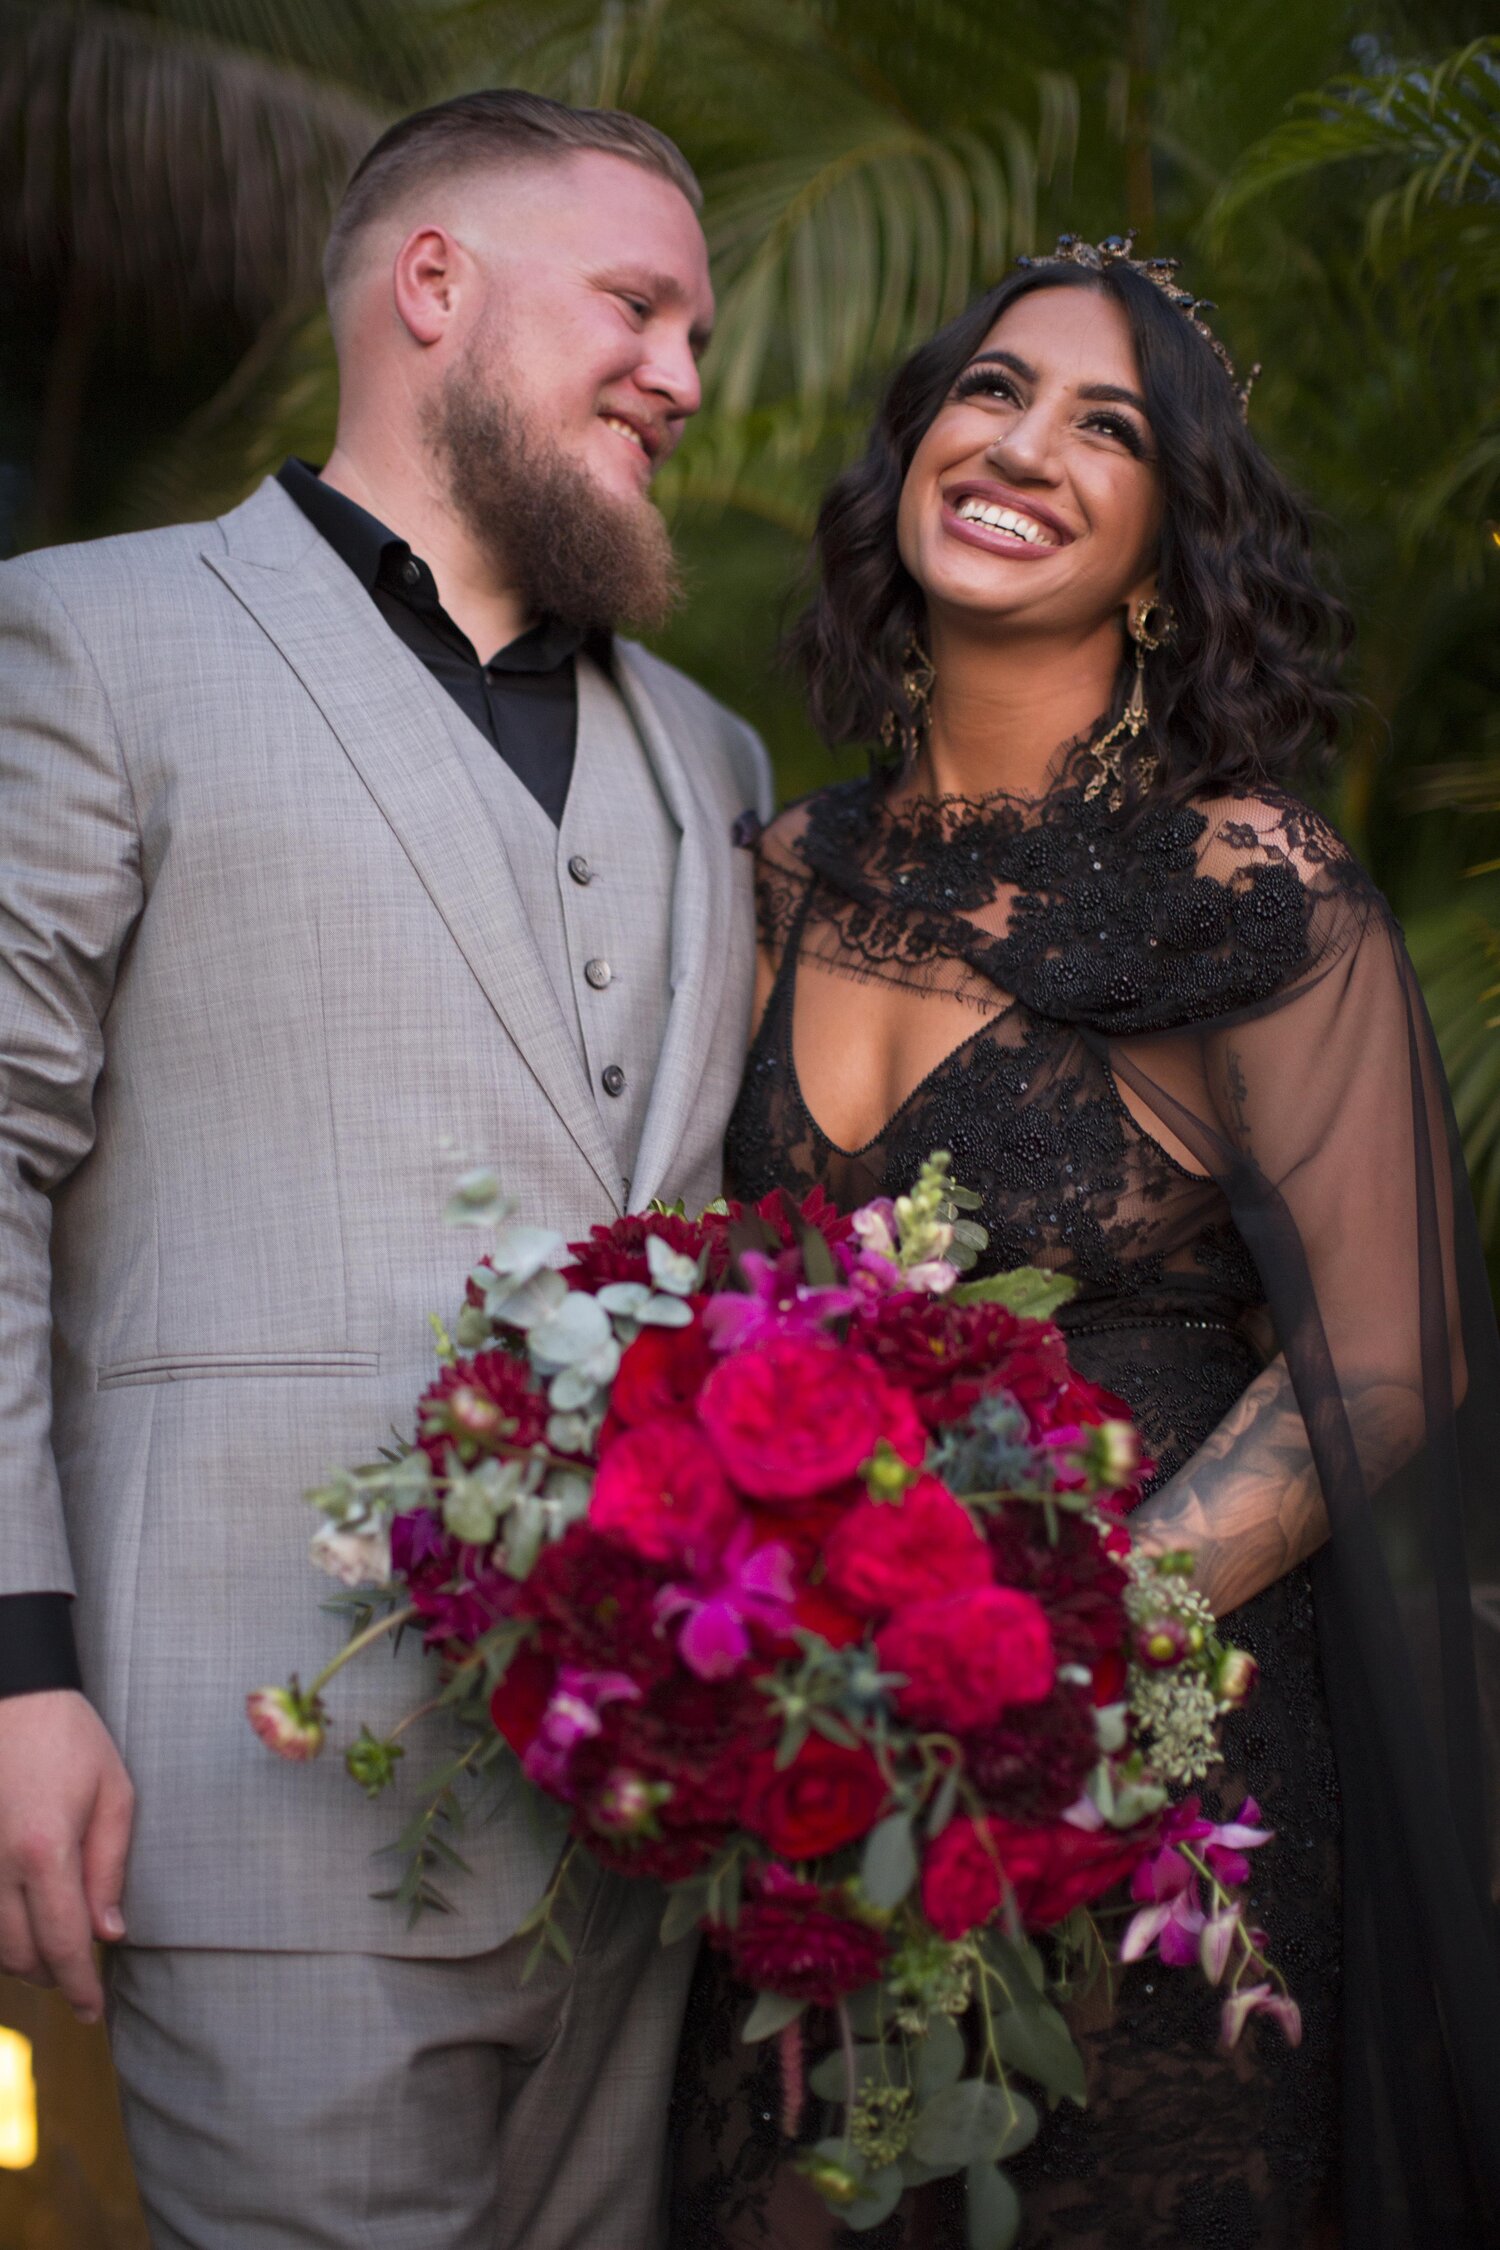 A wedding couple stand together and smile.